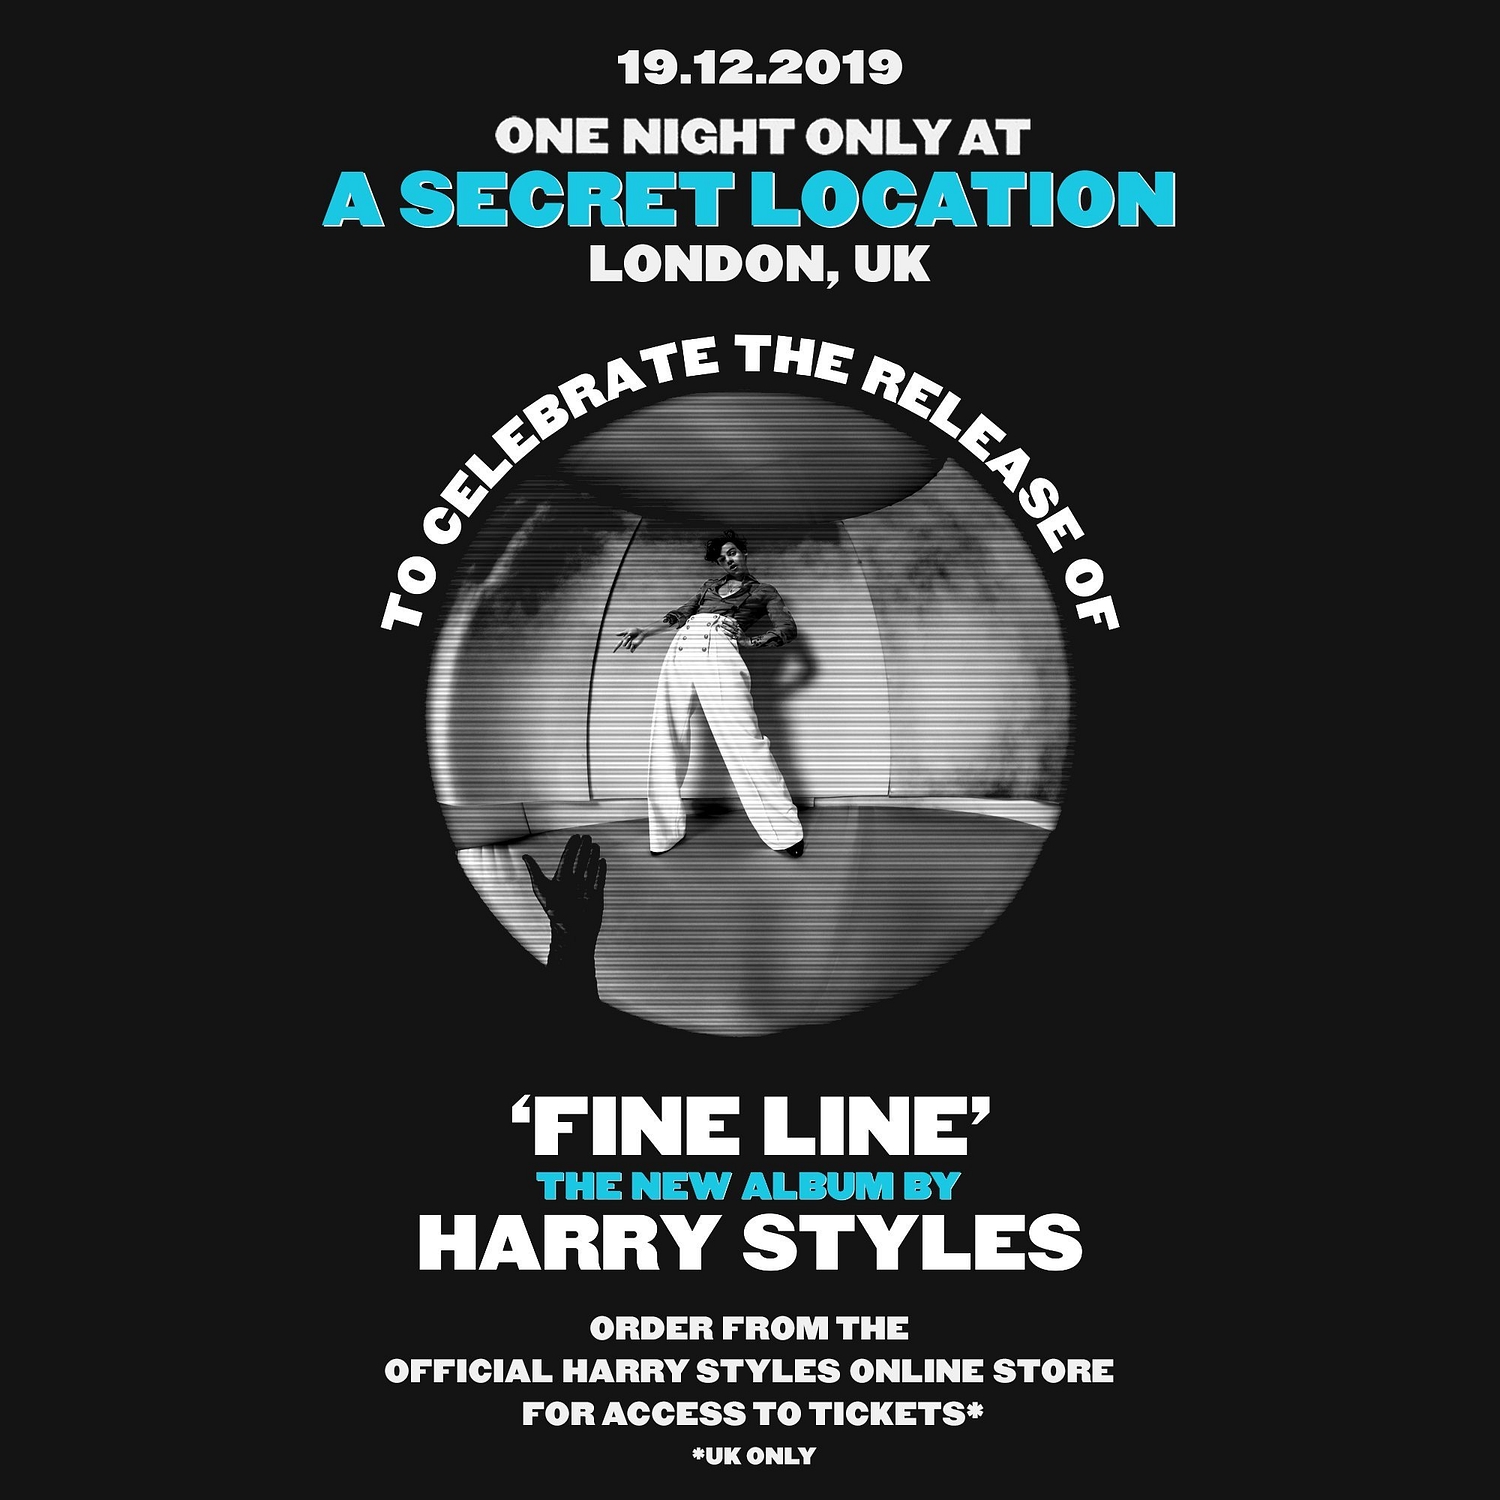 Harry Styles is playing a secret London location on 19th December